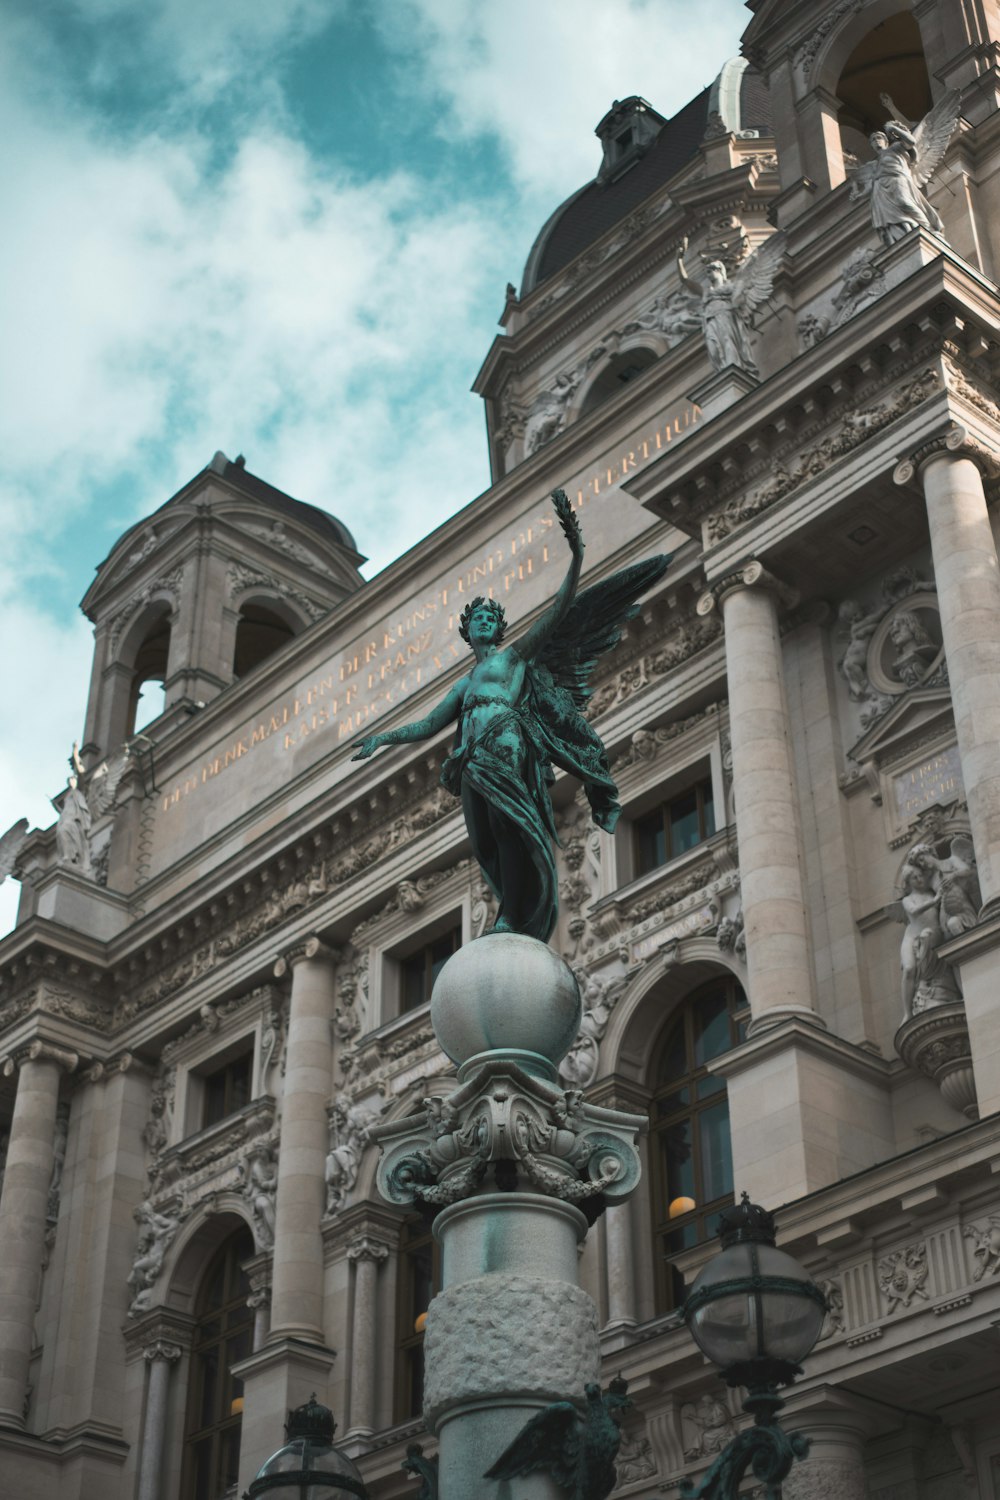 a statue on top of a light pole in front of a building